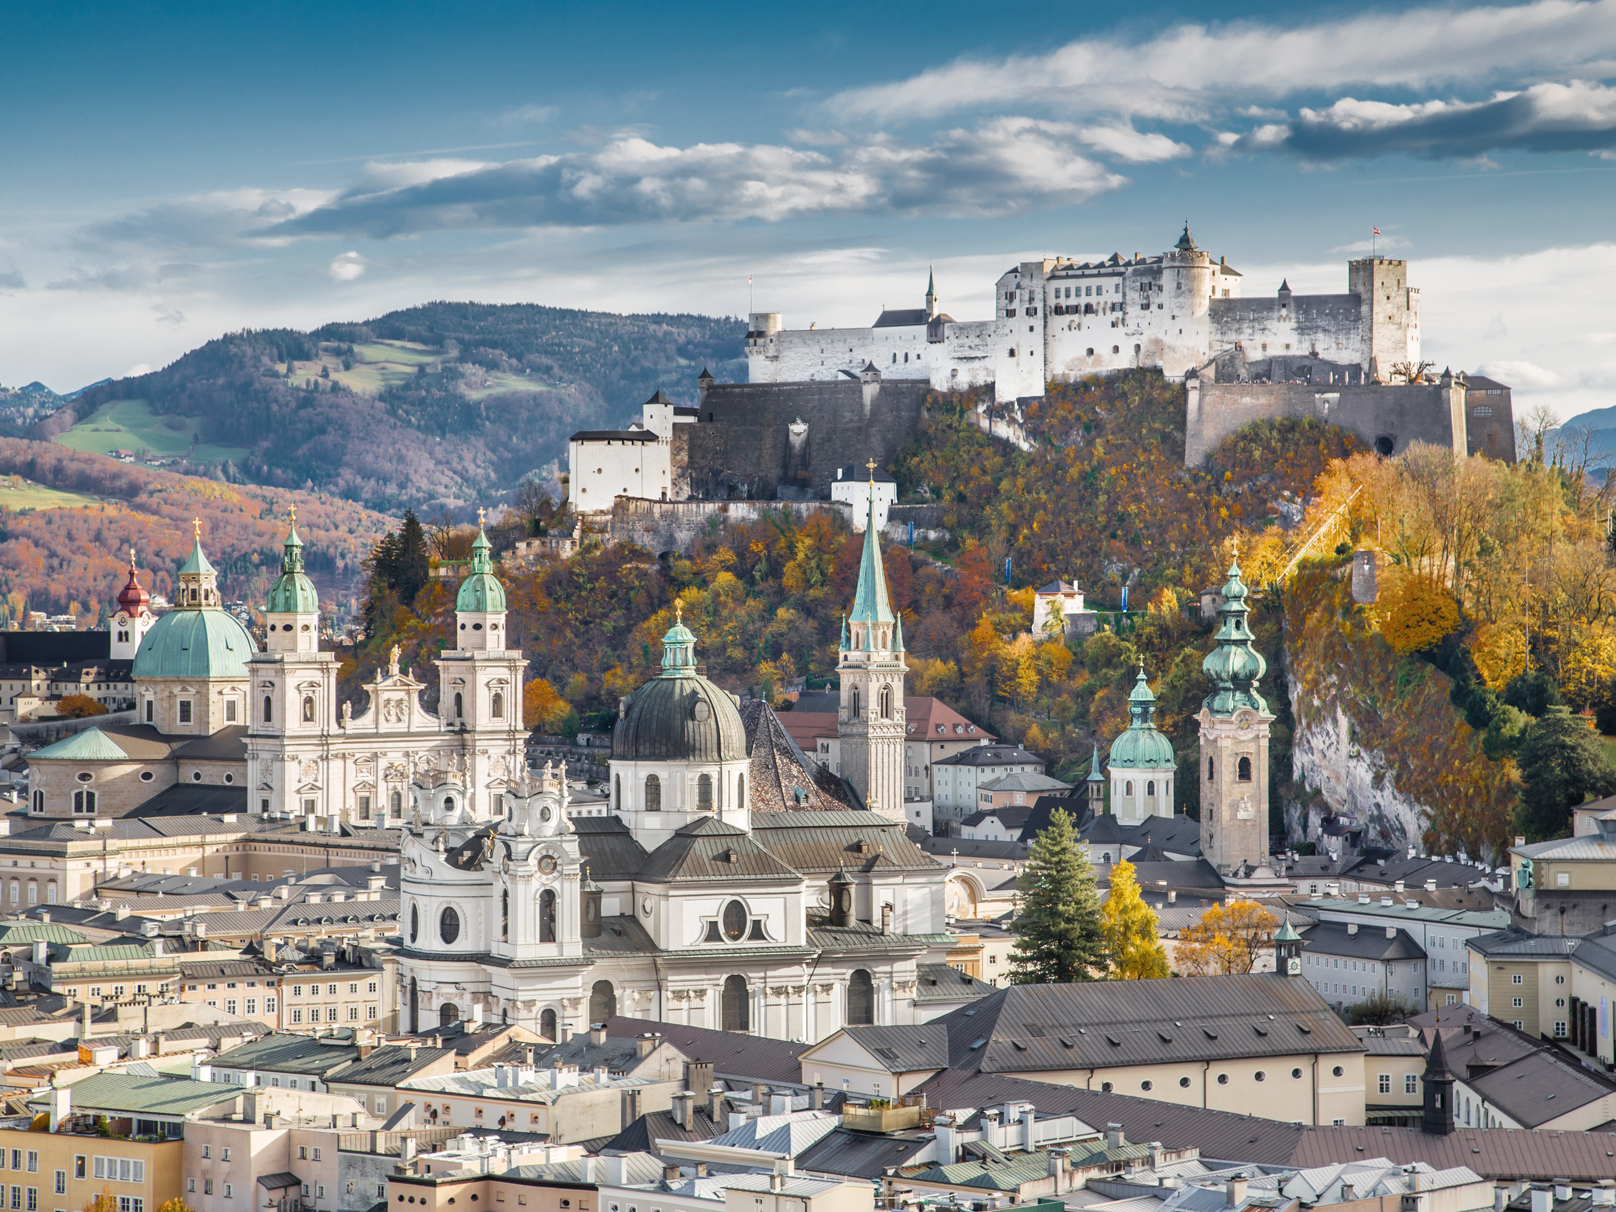 The picture shows the city of Salzburg.